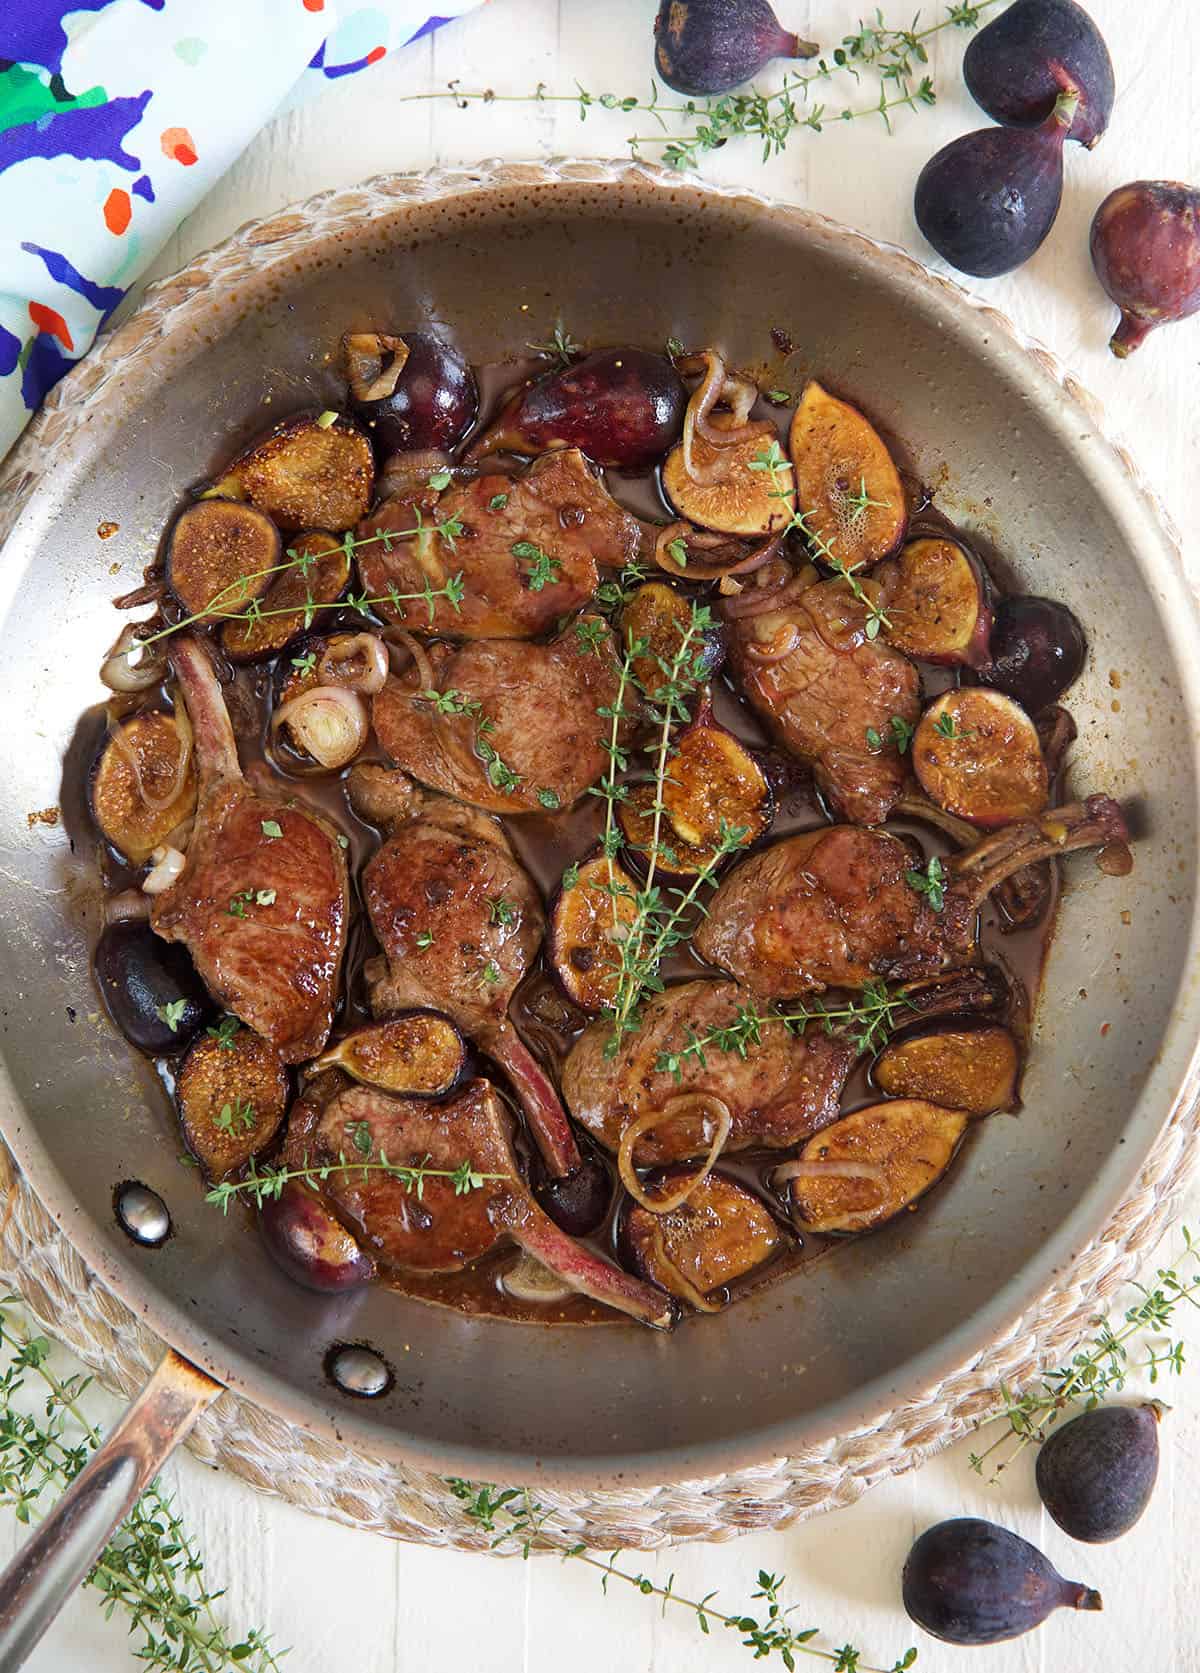 Lamb, figs, and herbs are cooking in a large metal pan. 